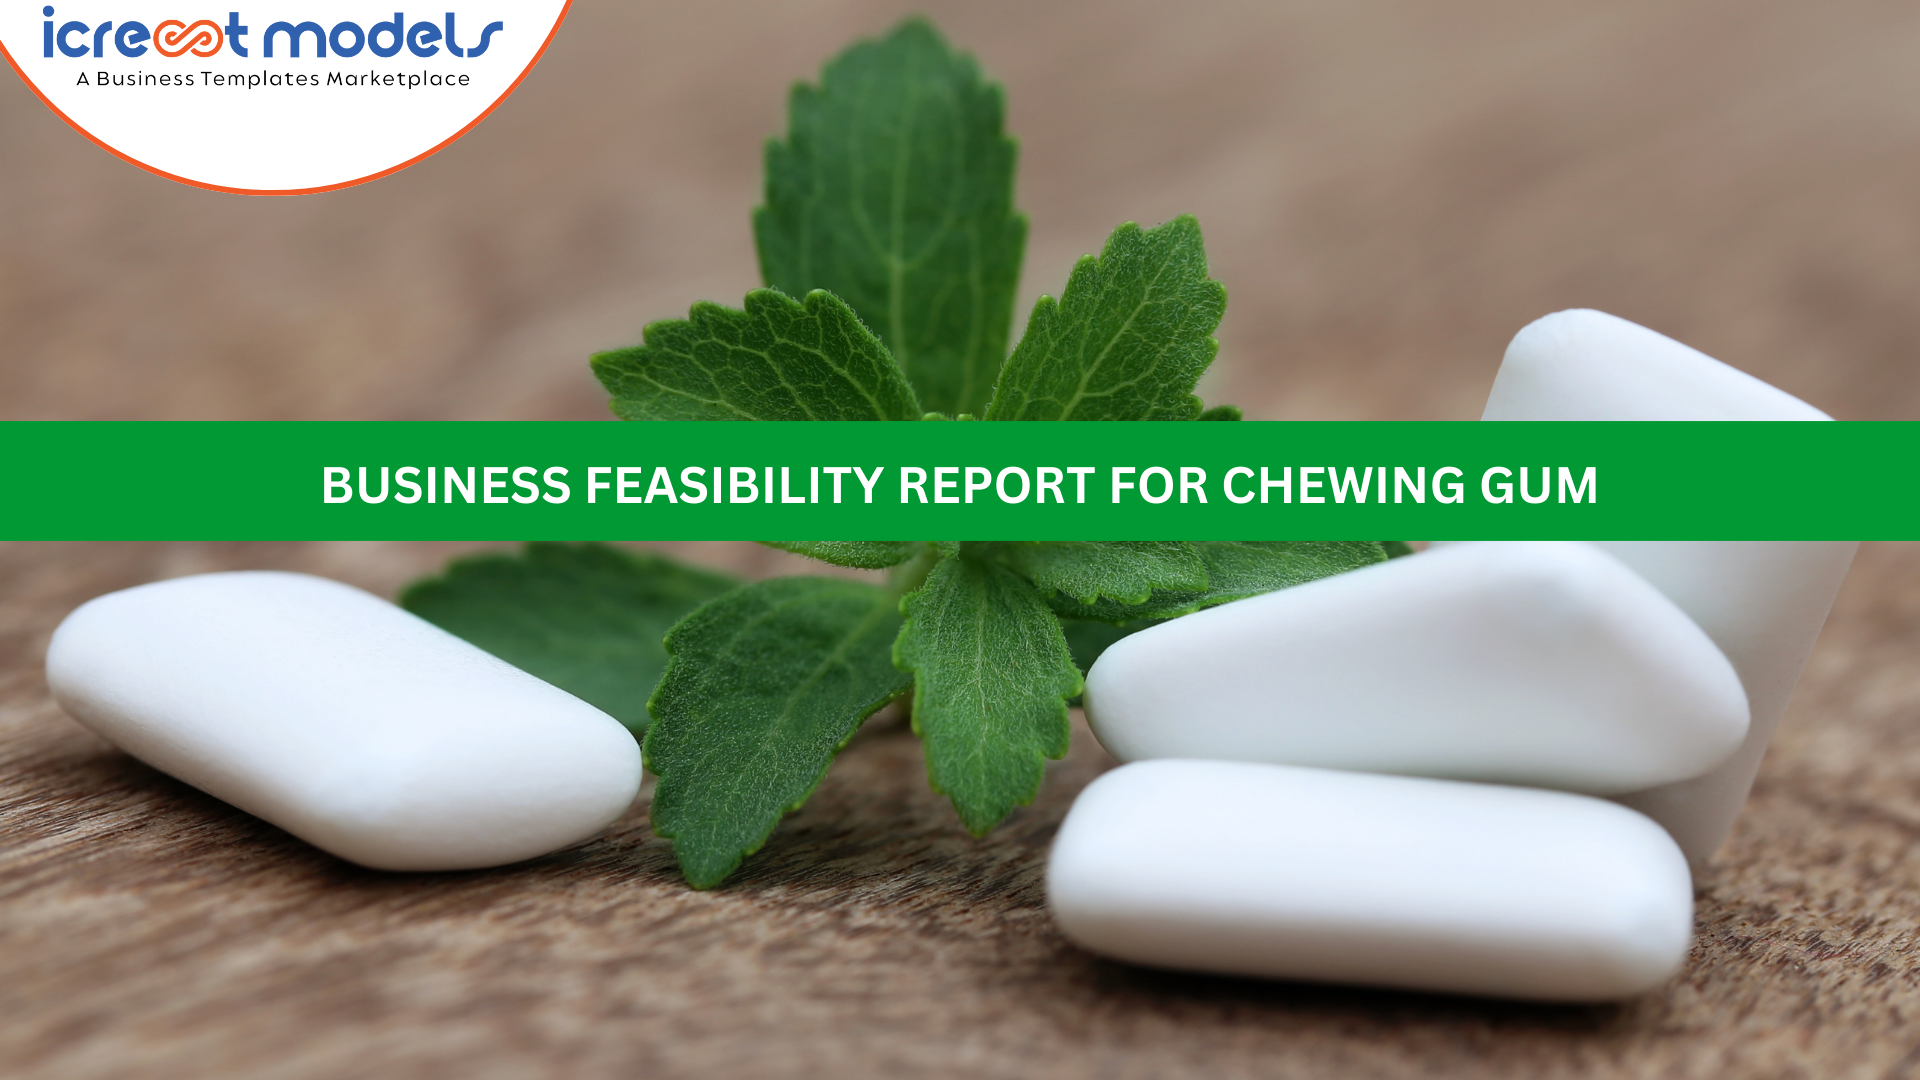 BUSINESS FEASIBILITY REPORT FOR CHEWING GUM